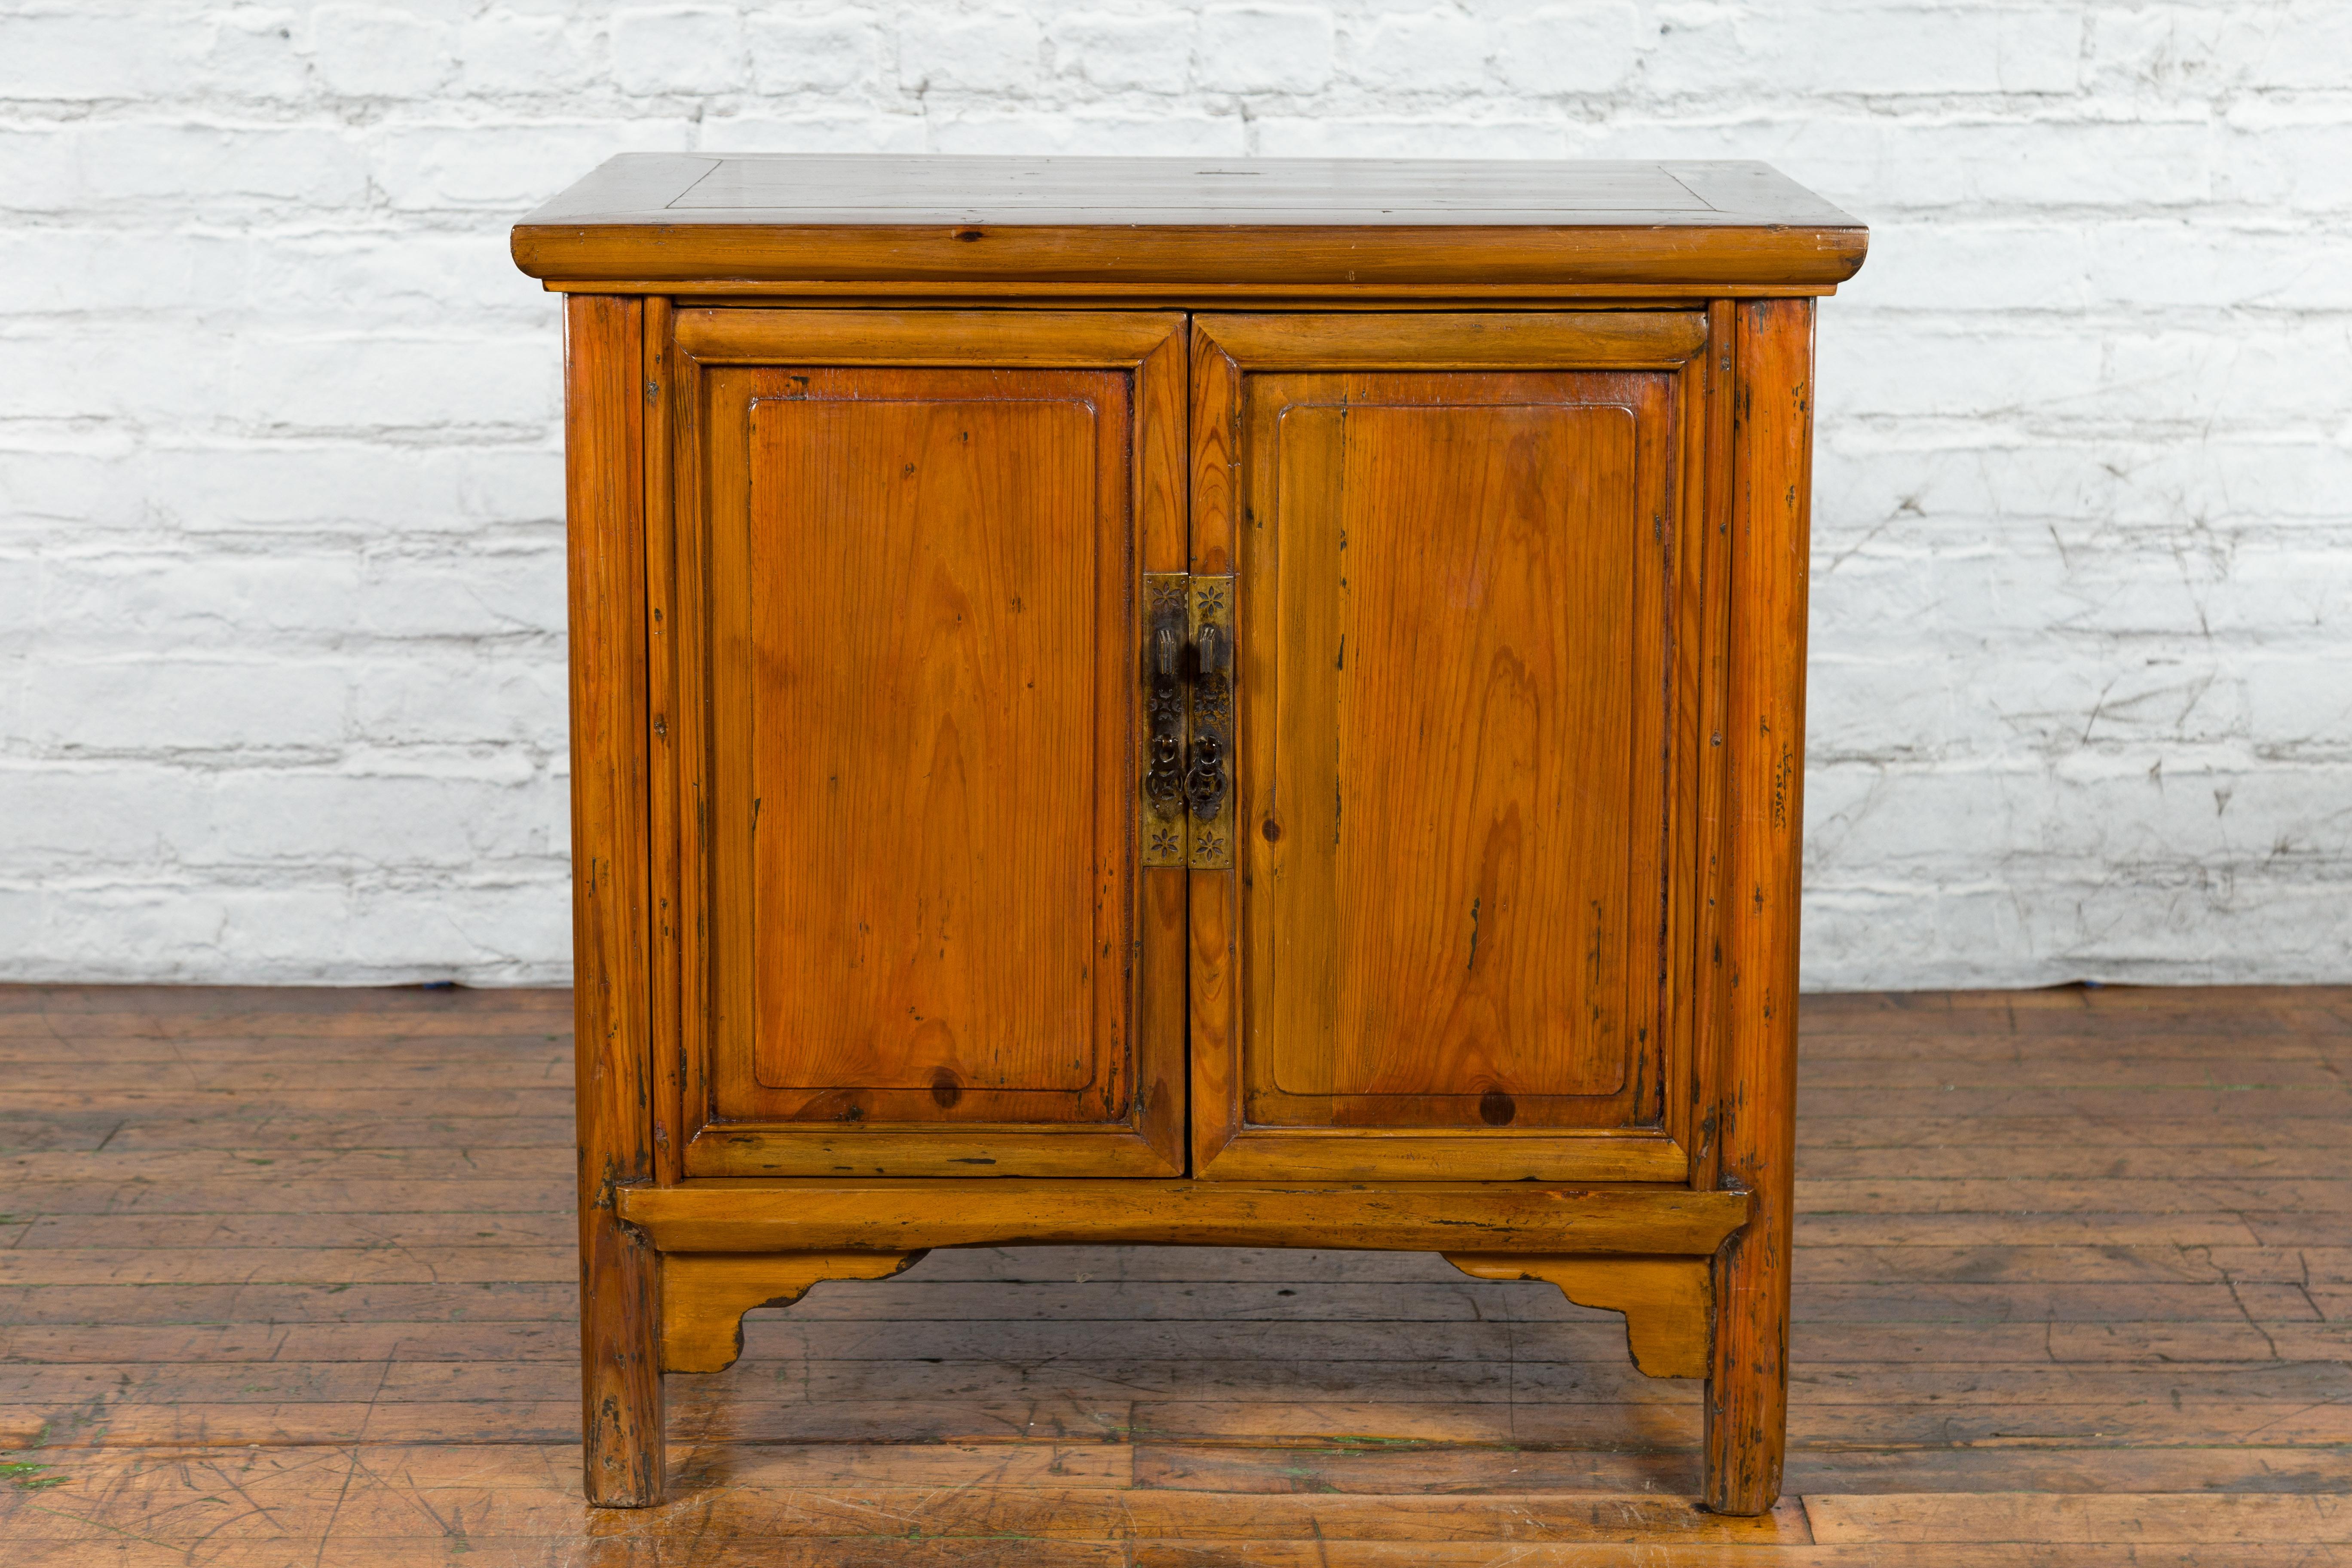 A Chinese natural lacquer side cabinet from the early 20th century, with brass hardware. Created in China during the early years of the 20th century, this side cabinet features a rectangular top with central board, sitting above two doors fitted